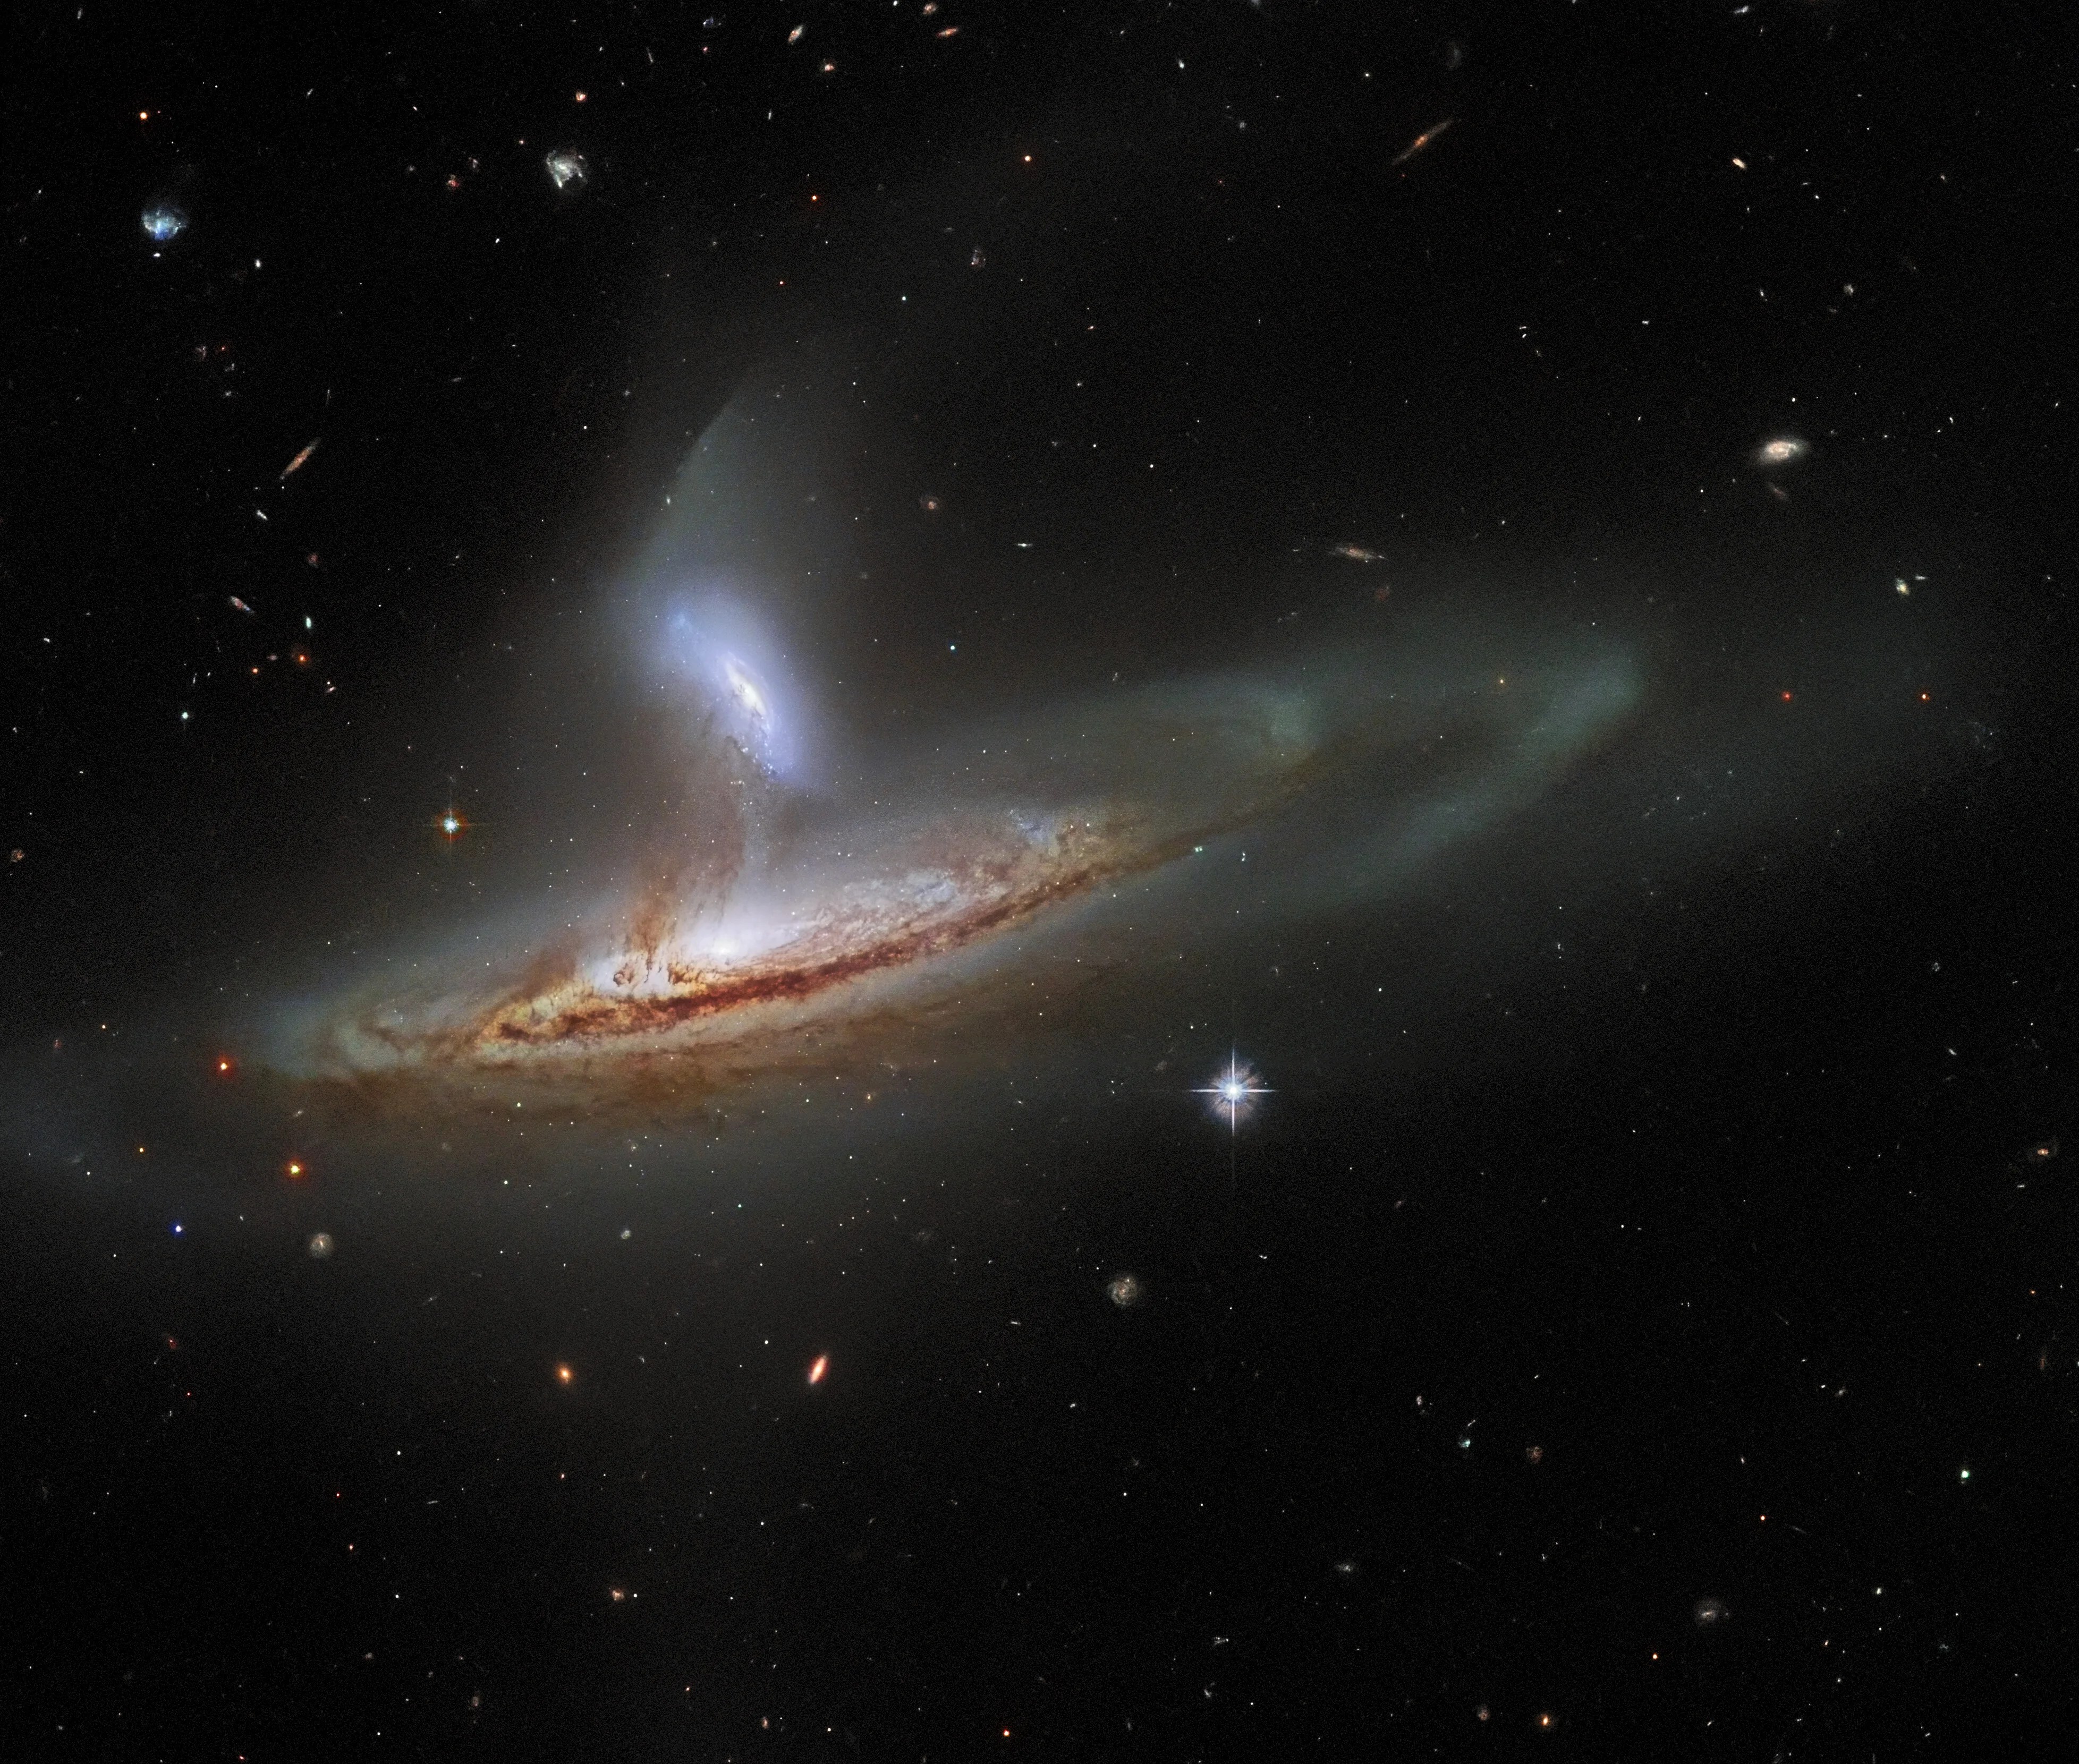 Galaxy pair interacting. a nearly edge-on spiral galaxy from left-center to right side of the image. another galaxy perpendicular and above it. dust and gas stream between them.